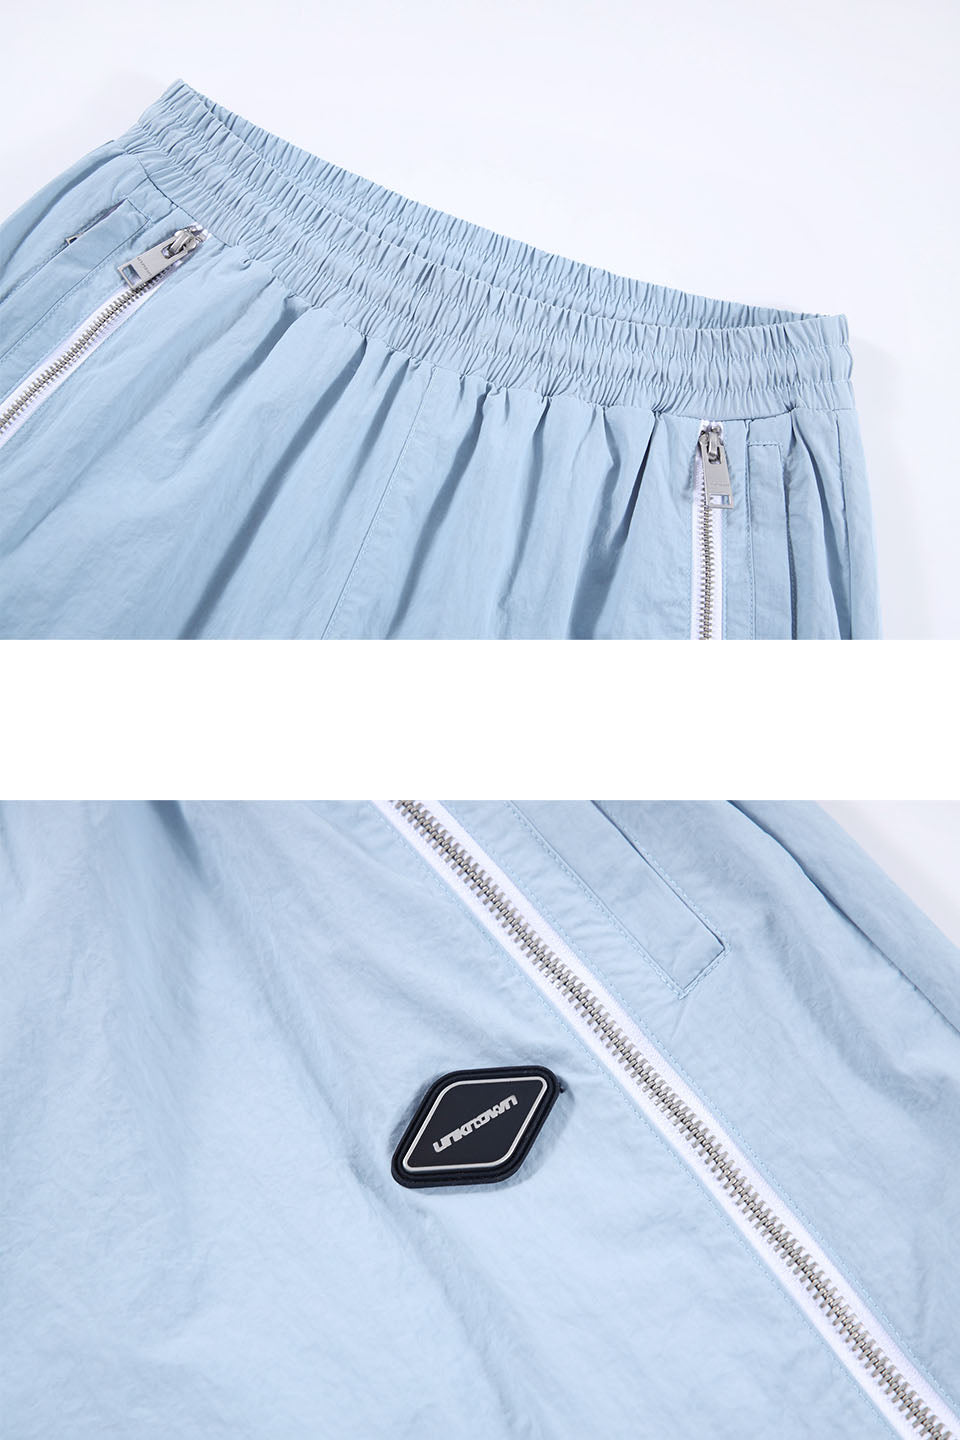 Baby Blue / White Zipped Track Pants